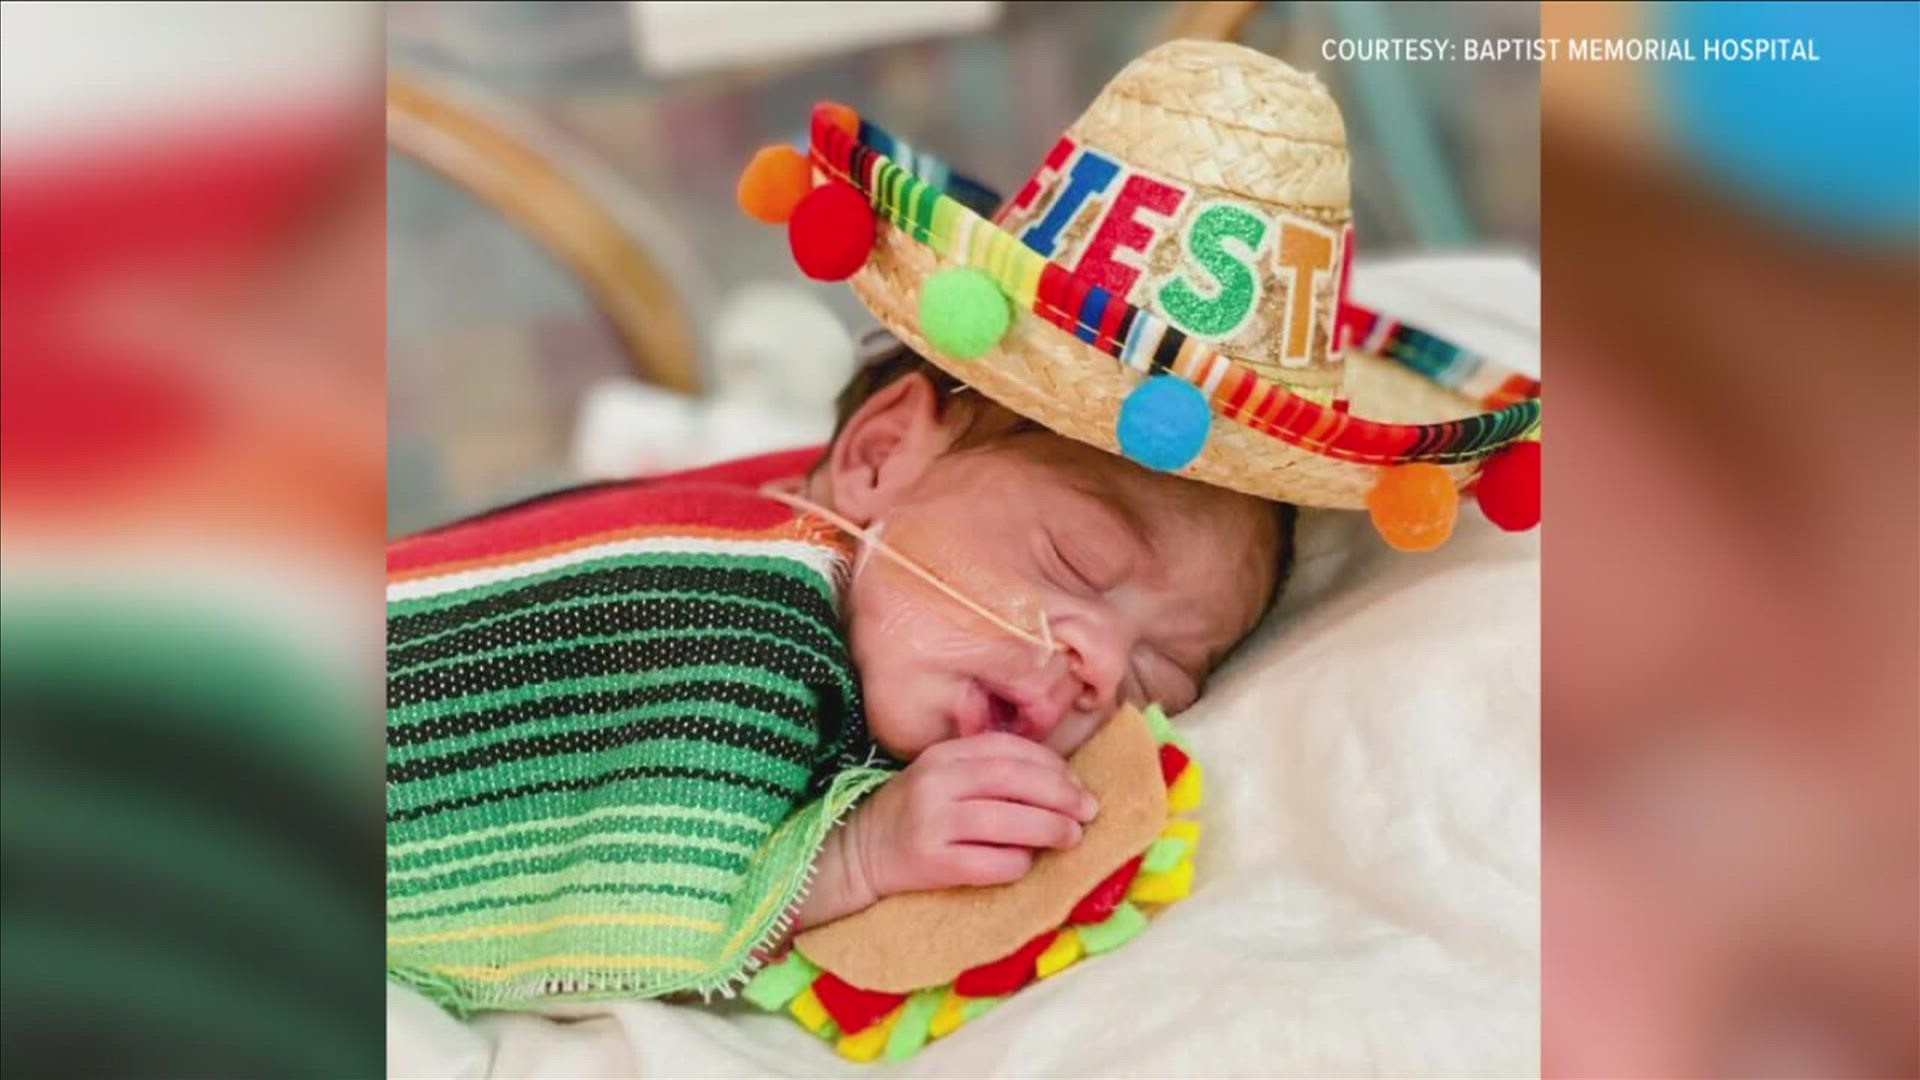 The nurses in the NICU department at Baptist Women's Hospital dressed up the babies in honor of the holiday.